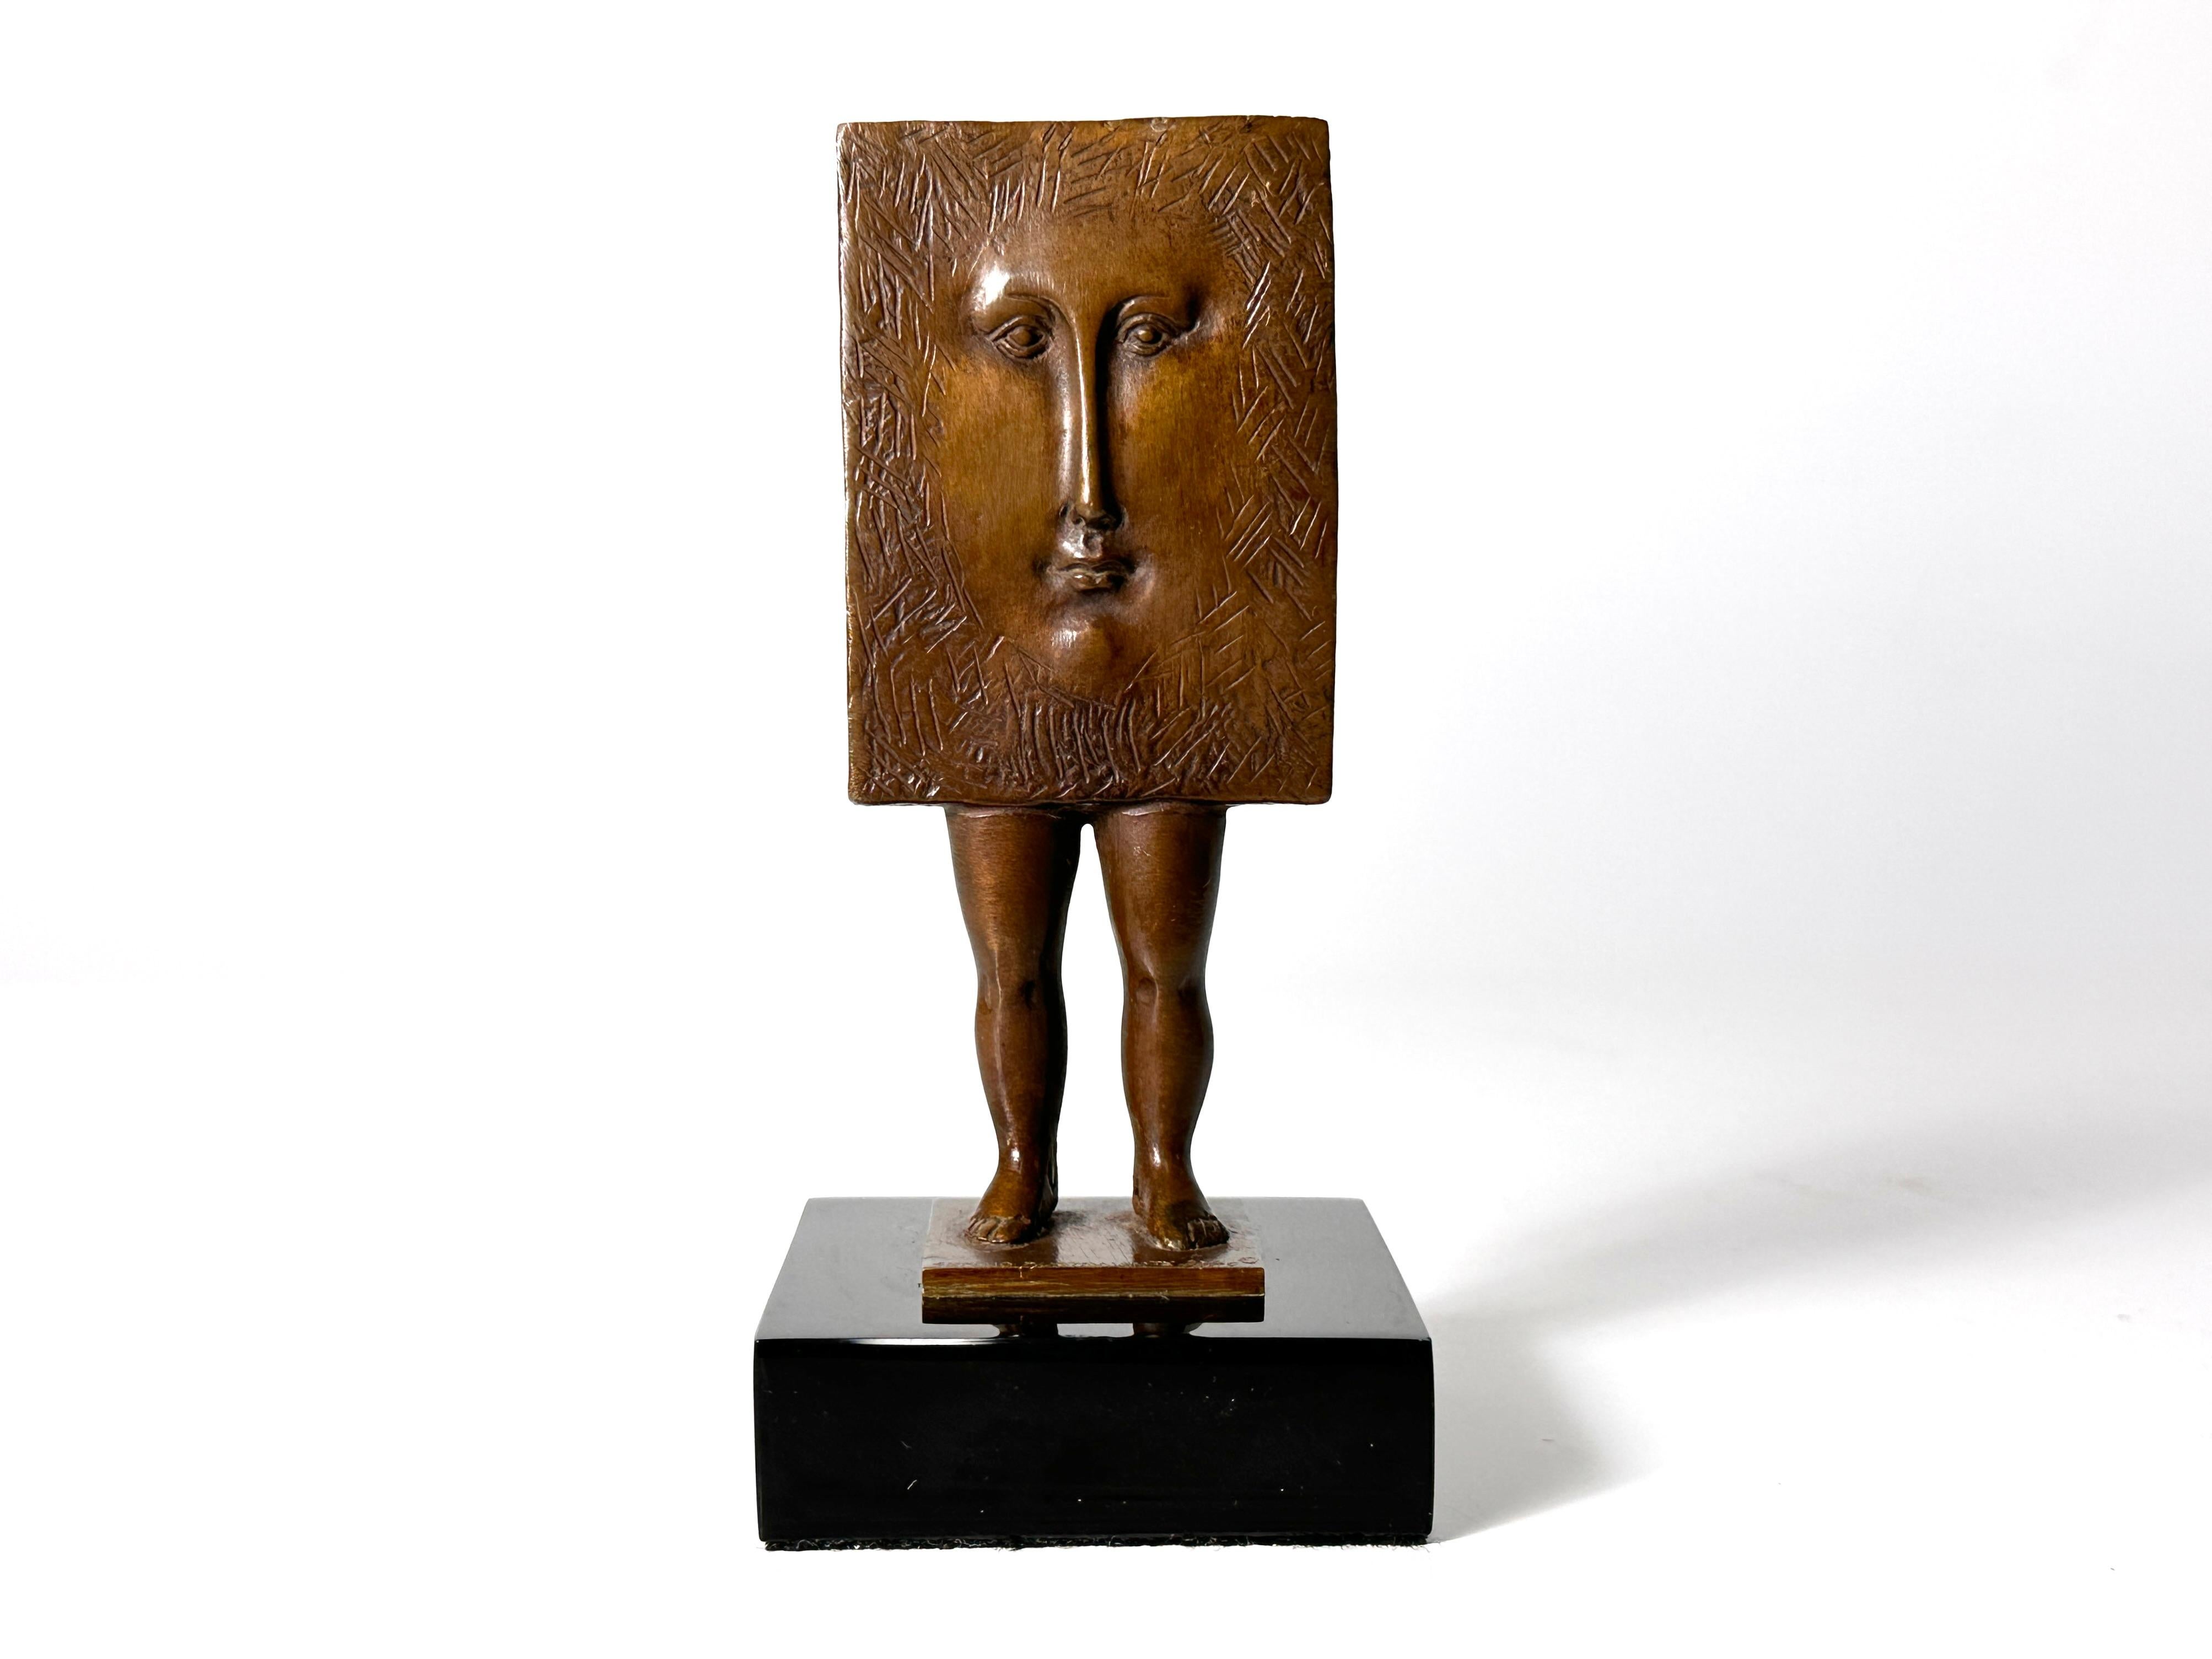 Surrealist bronze sculpture by Sergio Bustamante circa 1990s
Abstract square face with legs on a black marble base 
Signed and numbered